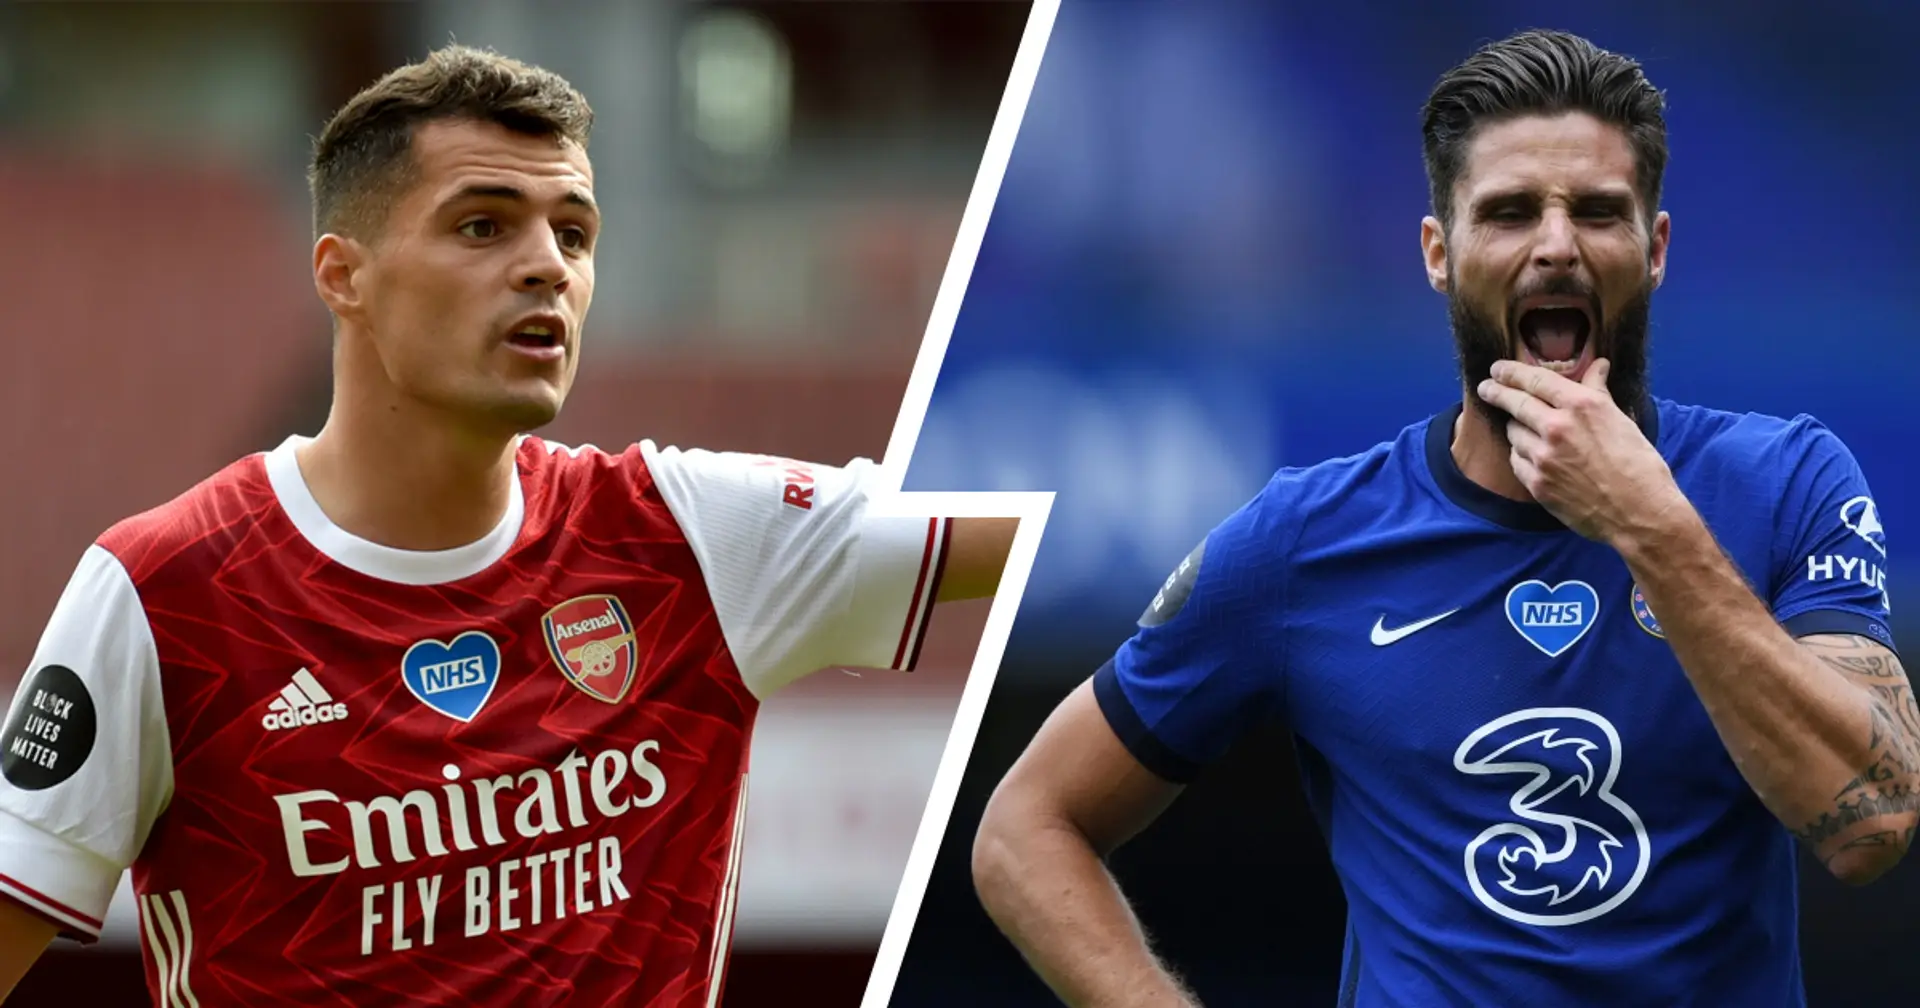 Arsenal vs Chelsea: preview, line-ups, key duels, stats and more